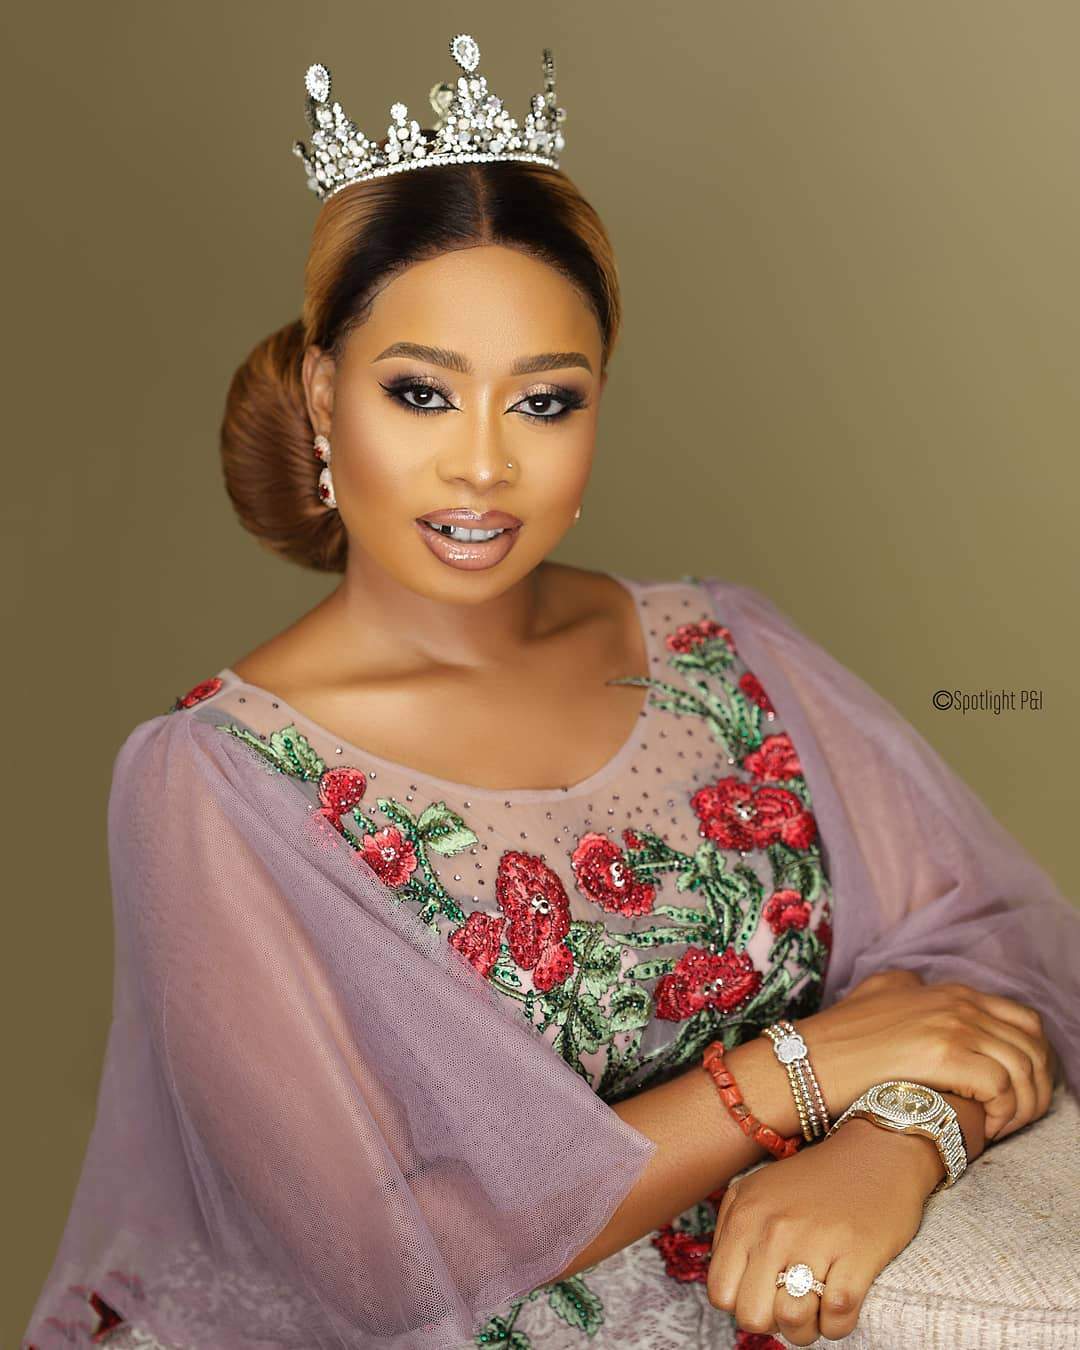 Alaafin Of Oyo's Queen Ajoke Celebrates 29th Birthday With Beautiful Photos